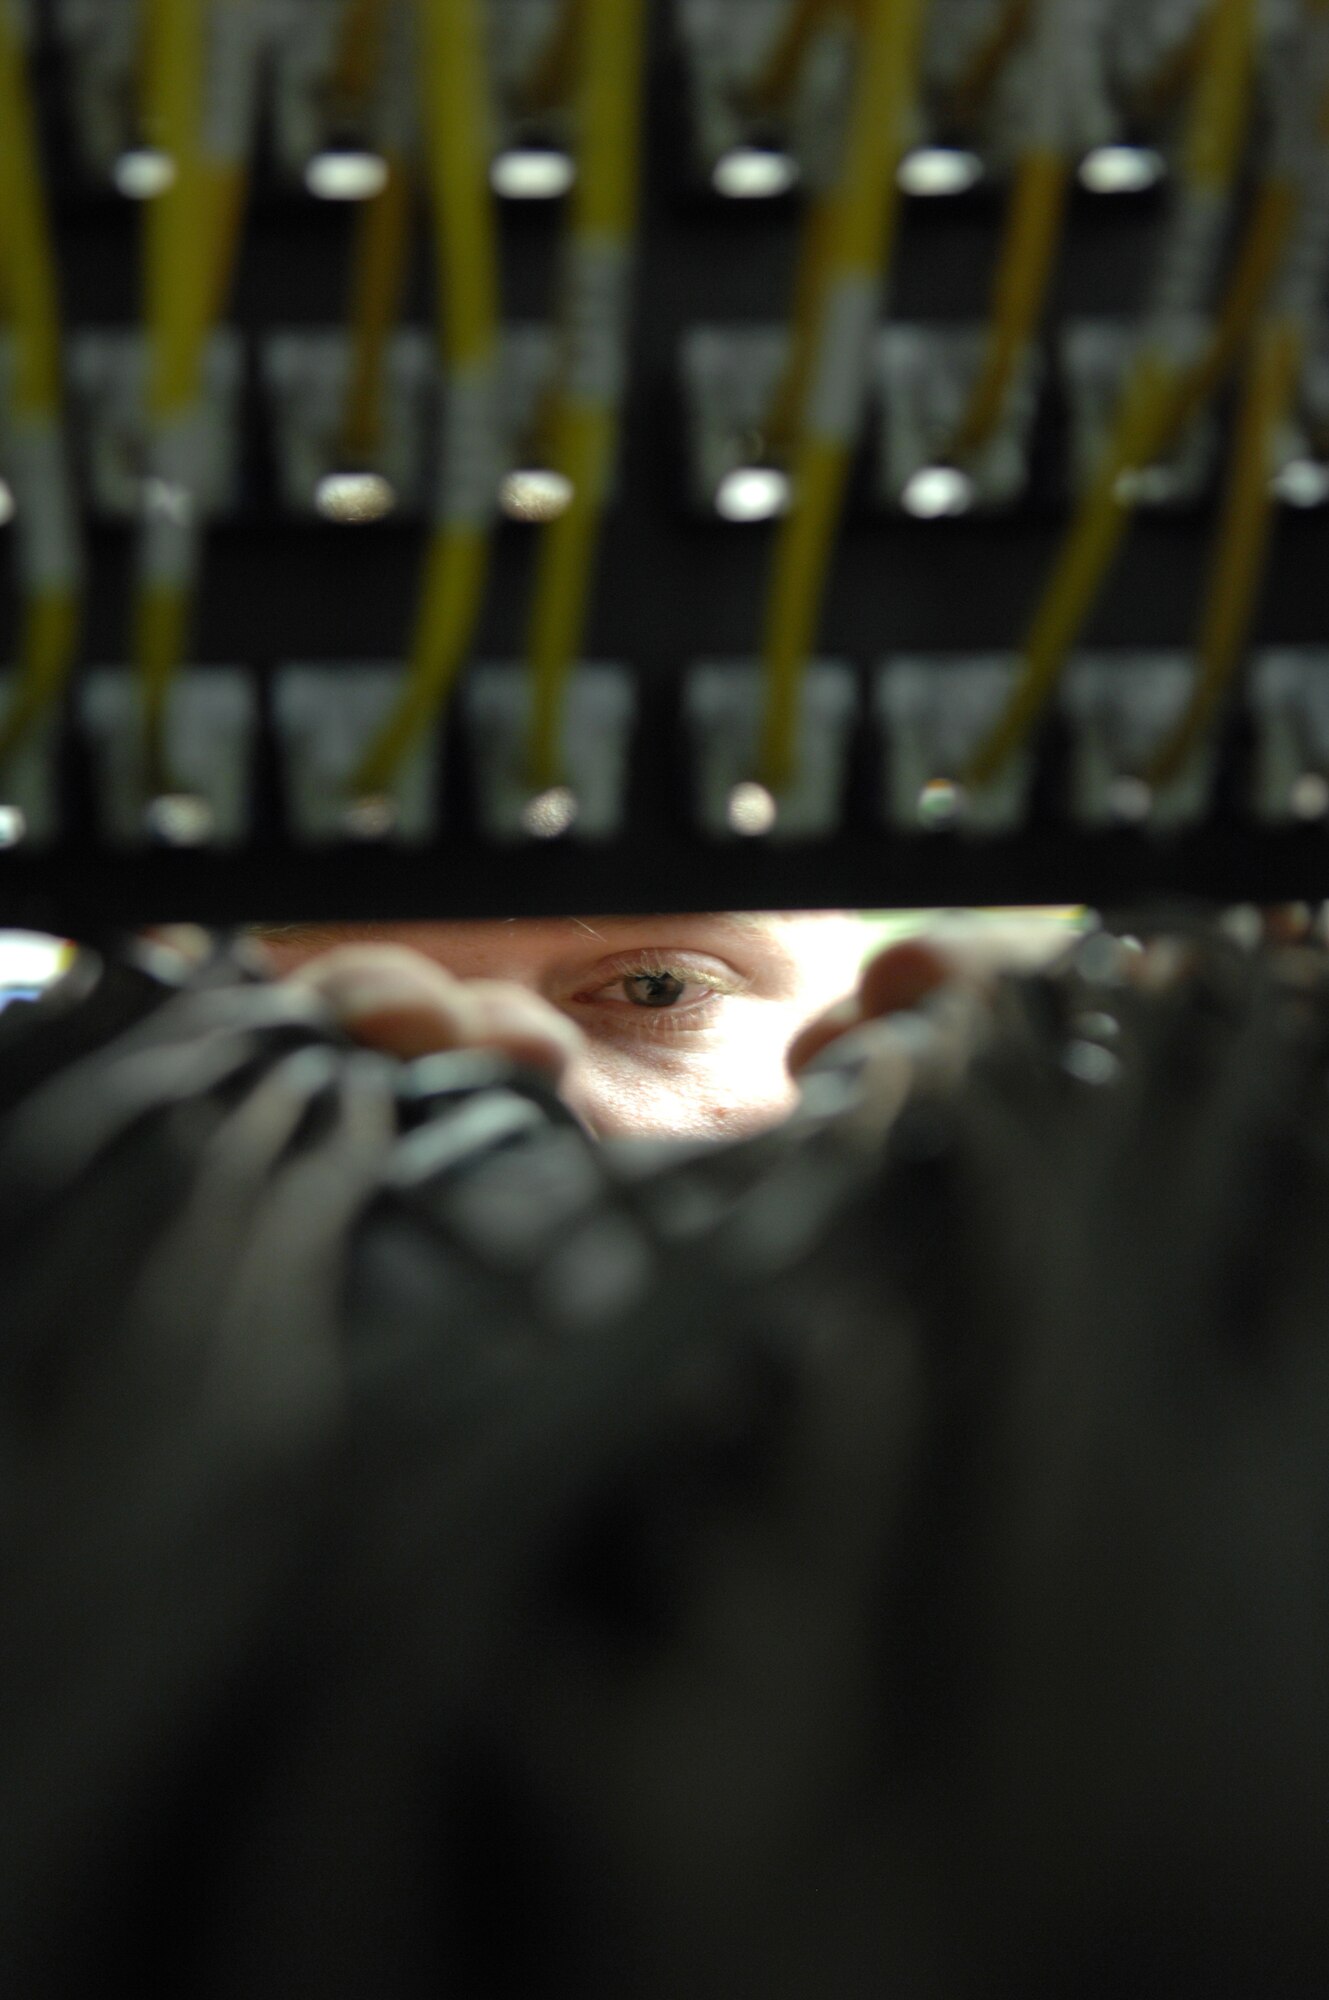 Senior Airman Etheridge, traces Cat-5 cable from the existing patch panel at Holloman Air Force Base, N.M. May 05. SrA Etheridge is an infrastructure technician assigned to the 49th Communications Squadron.
(U.S. Air Force photo/ Senior Airman Anthony Nelson Jr)  
